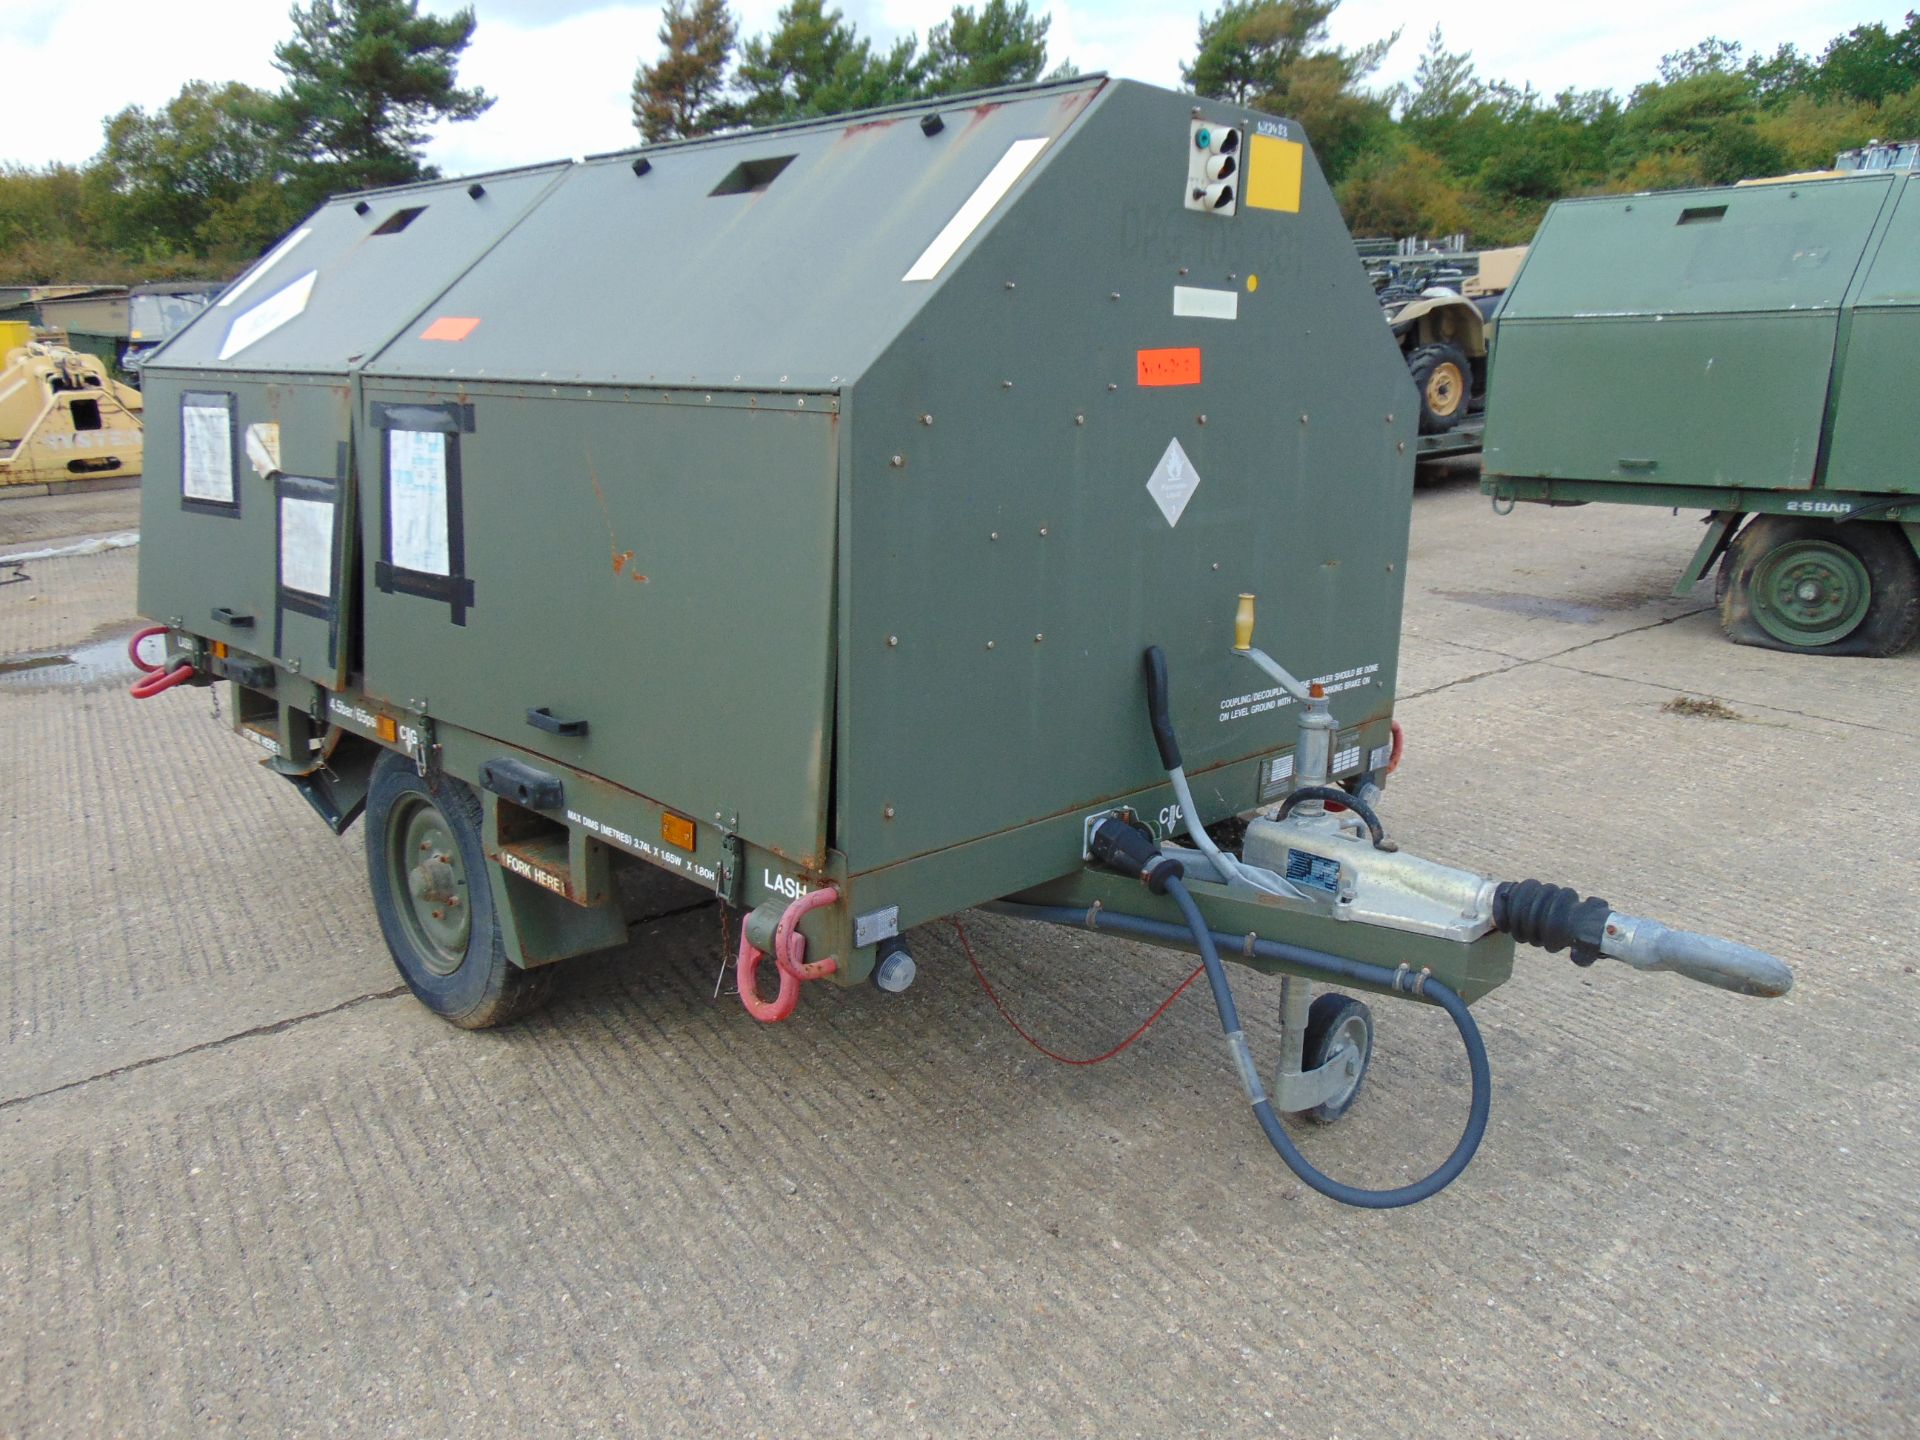 Moskit Single Axle Self Contained Airfield Lighting System c/w 2 x Onboard Generators